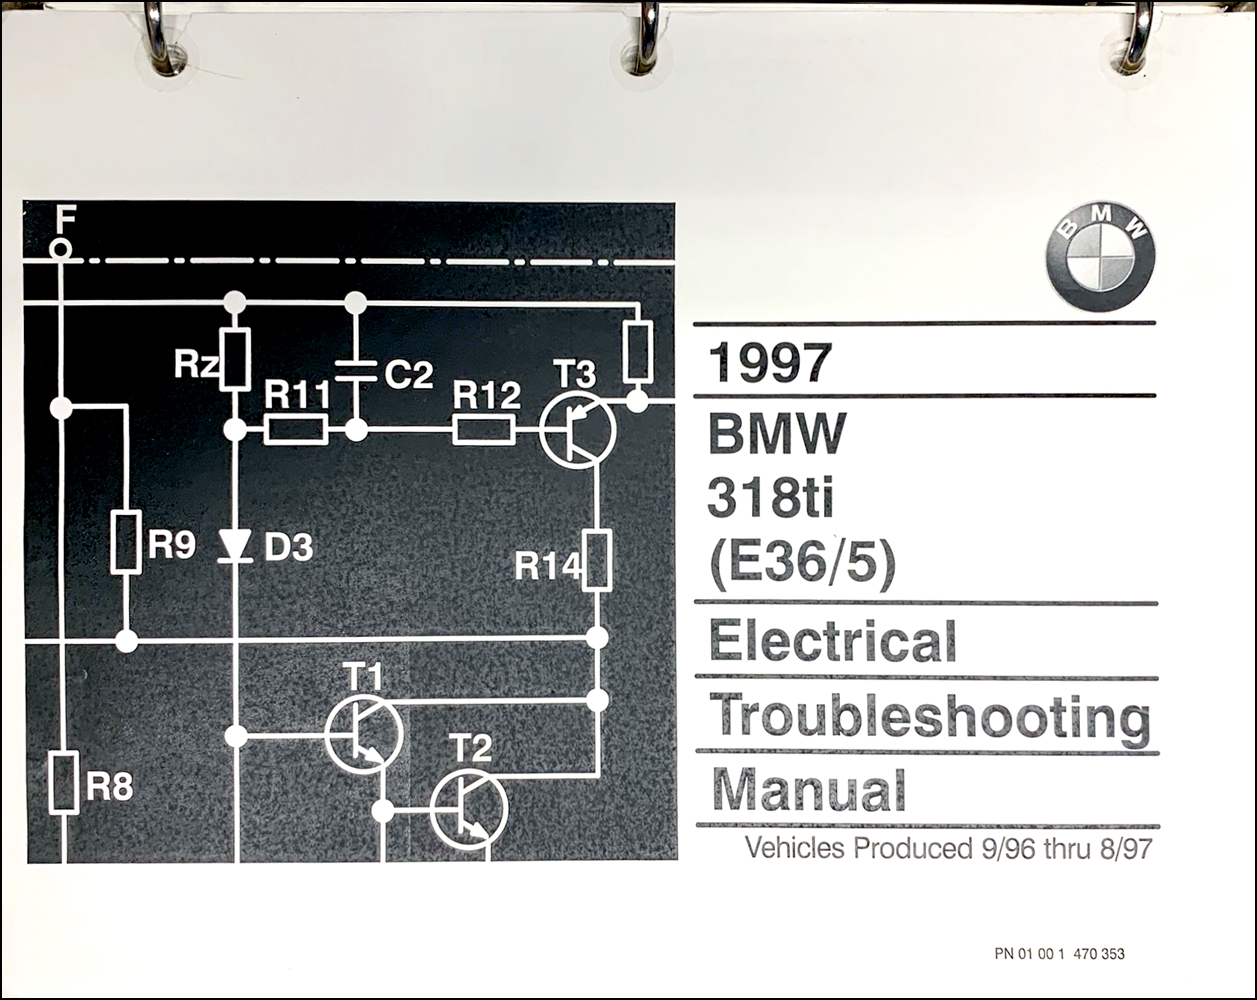 1997 BMW 318ti Electrical Troubleshooting Manual Original Second Edition